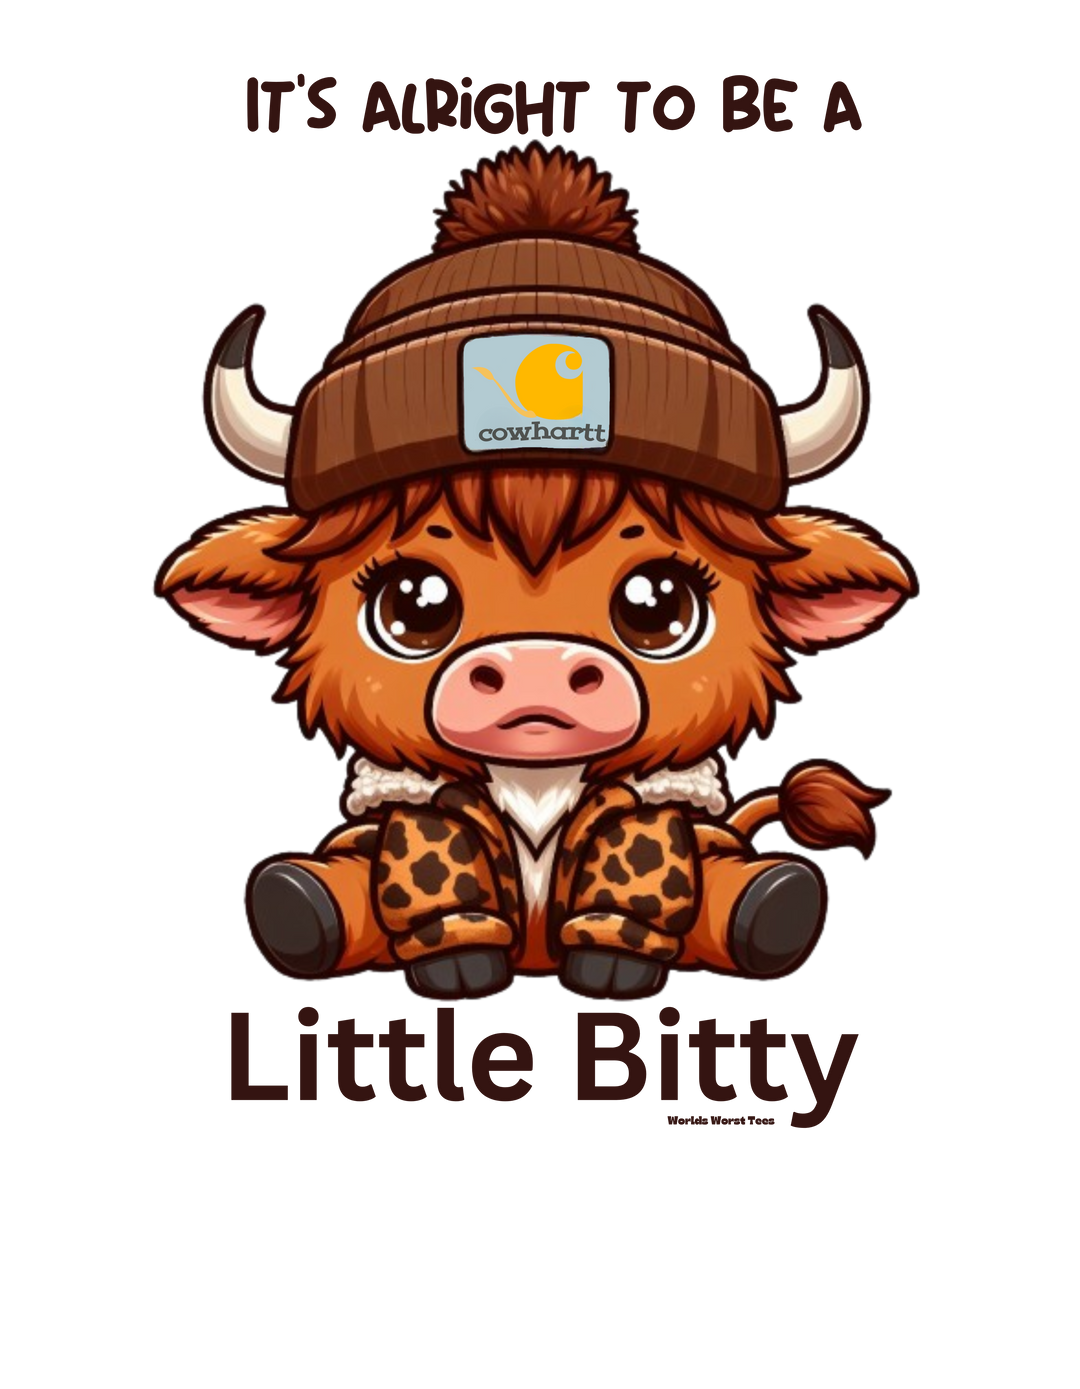 A Little Bitty Kids Tee featuring a cartoon cow design, perfect for active kids. 100% combed ring-spun cotton, soft-washed, and garment-dyed for comfort. Classic fit, ideal for all-day wear.